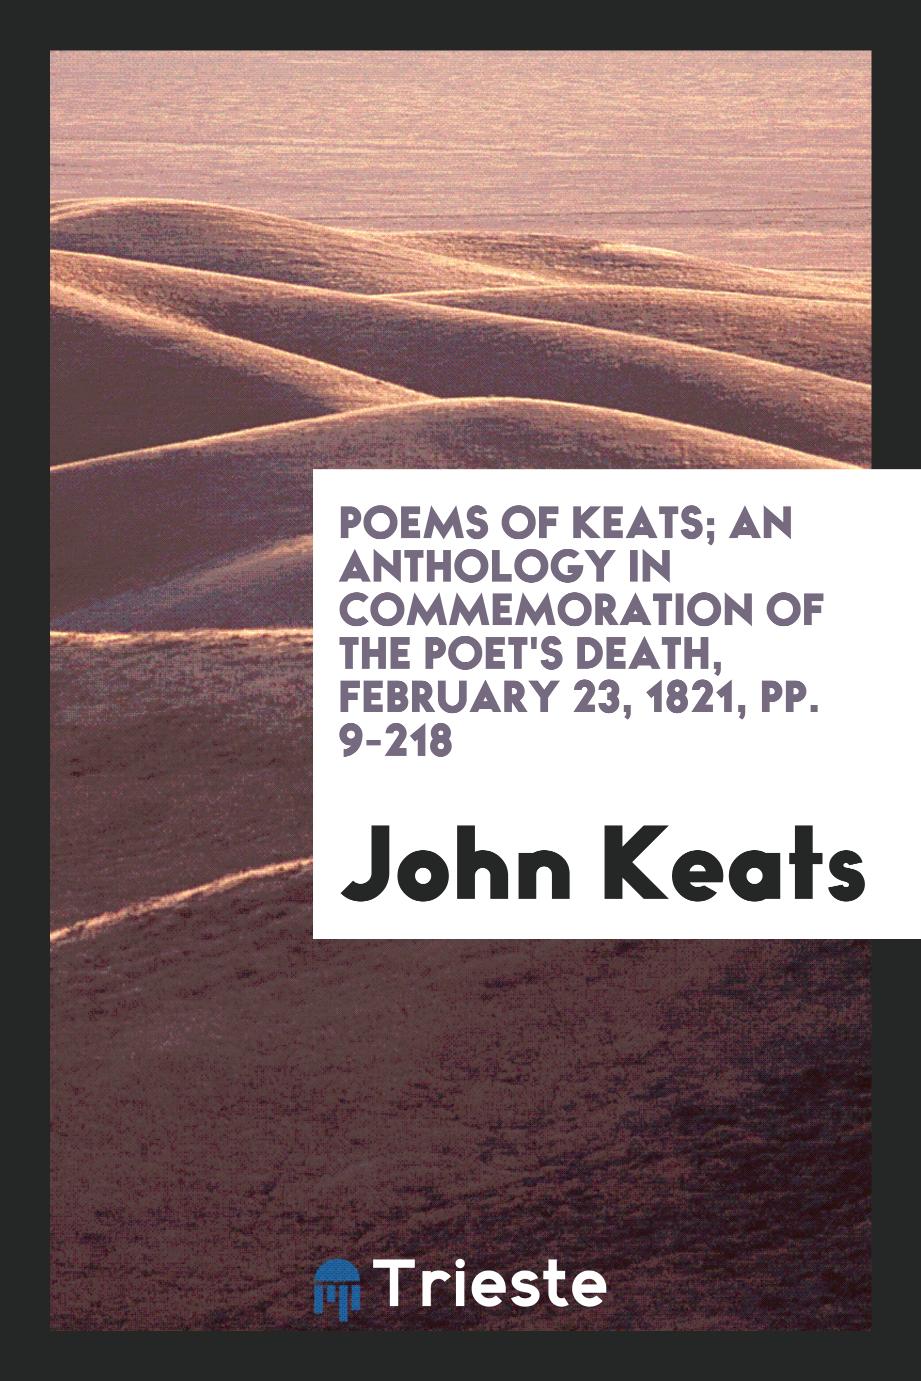 Poems of Keats; an anthology in commemoration of the poet's death, February 23, 1821, pp. 9-218